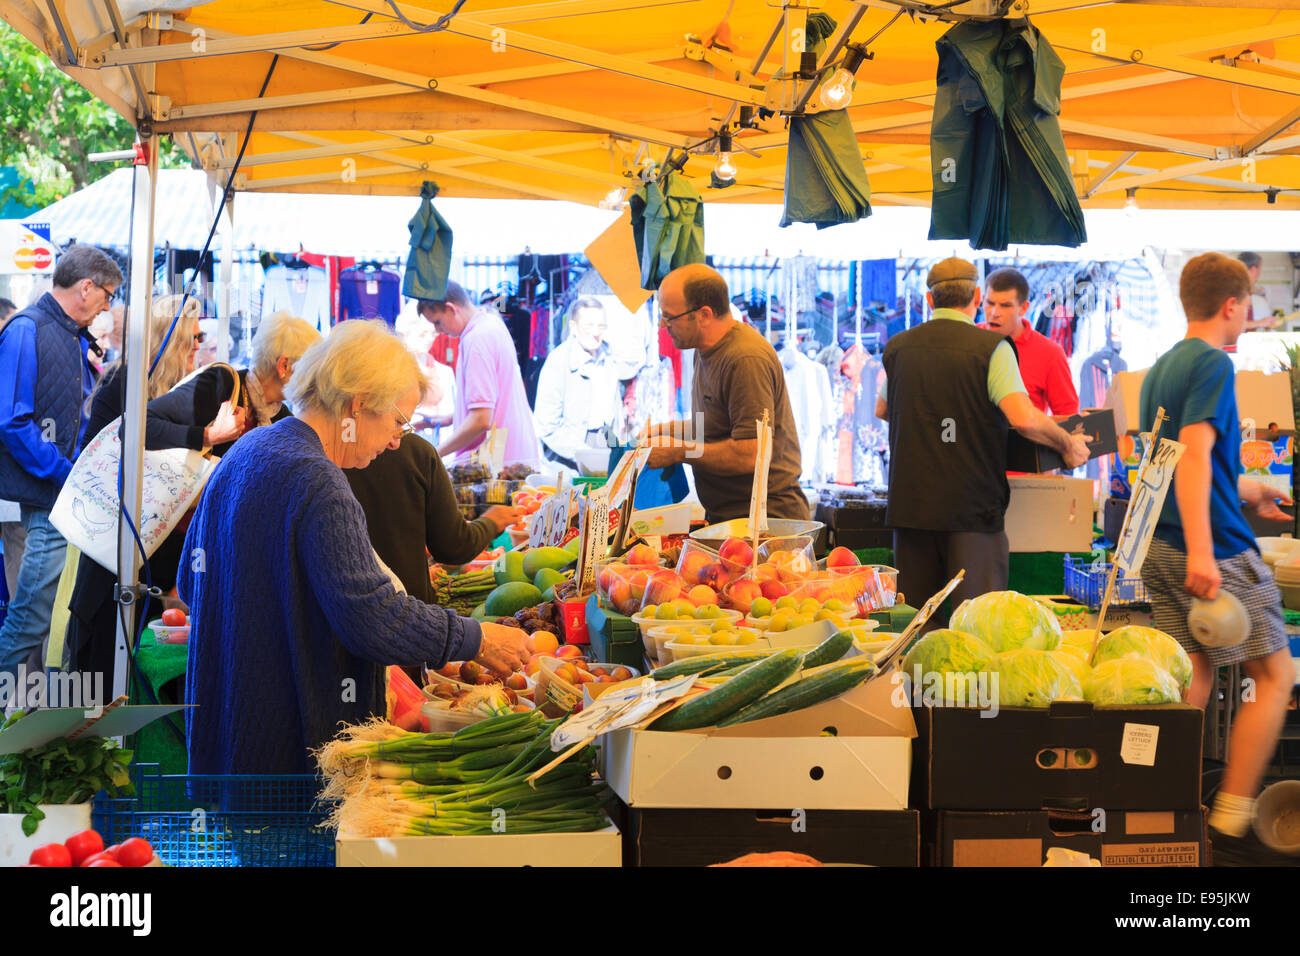 Customers selecting produce at a fruit and veg market stall Stock Photo